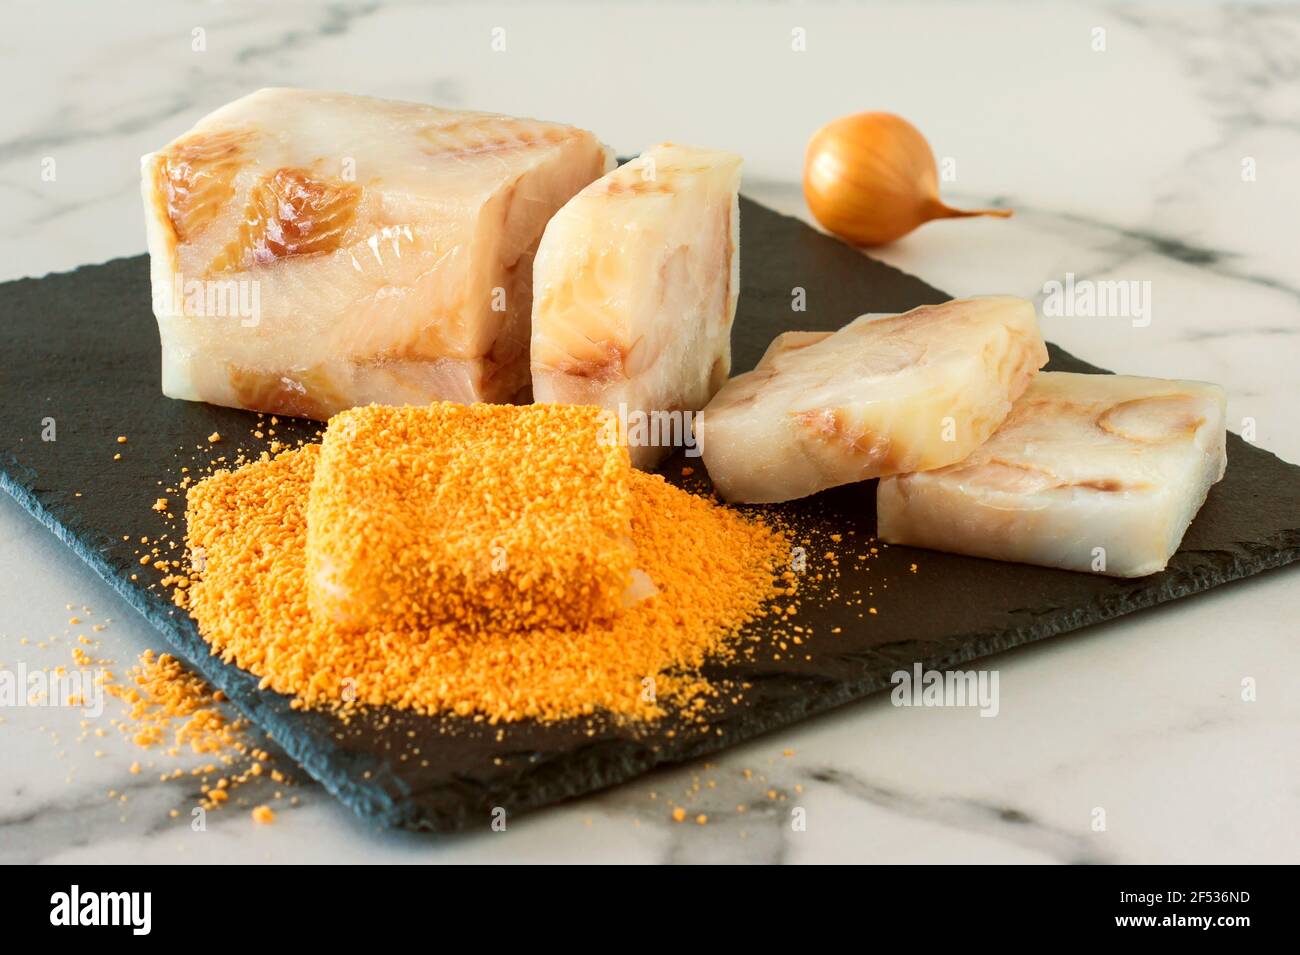 Raw fish blocked in crumbs on a stone board prepared for frying. Stock Photo